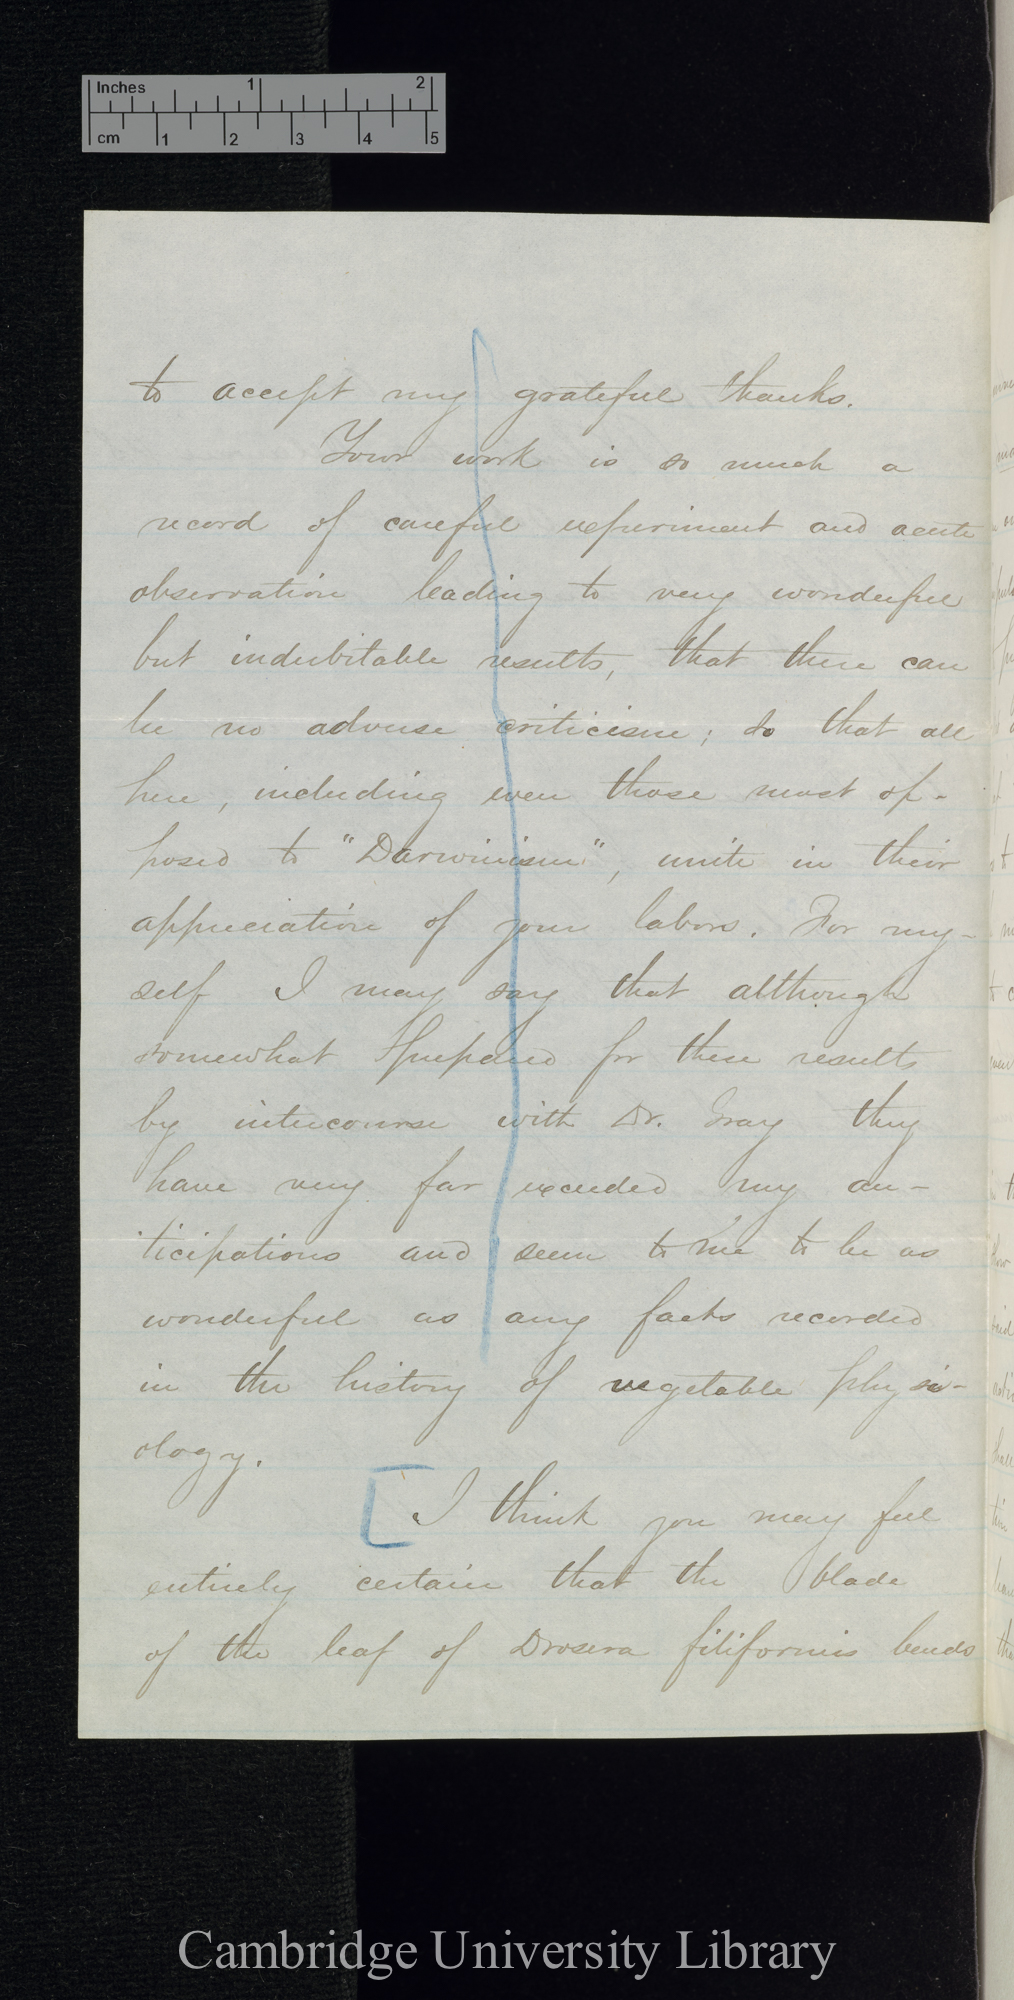 William Marriott Canby to Charles Robert Darwin